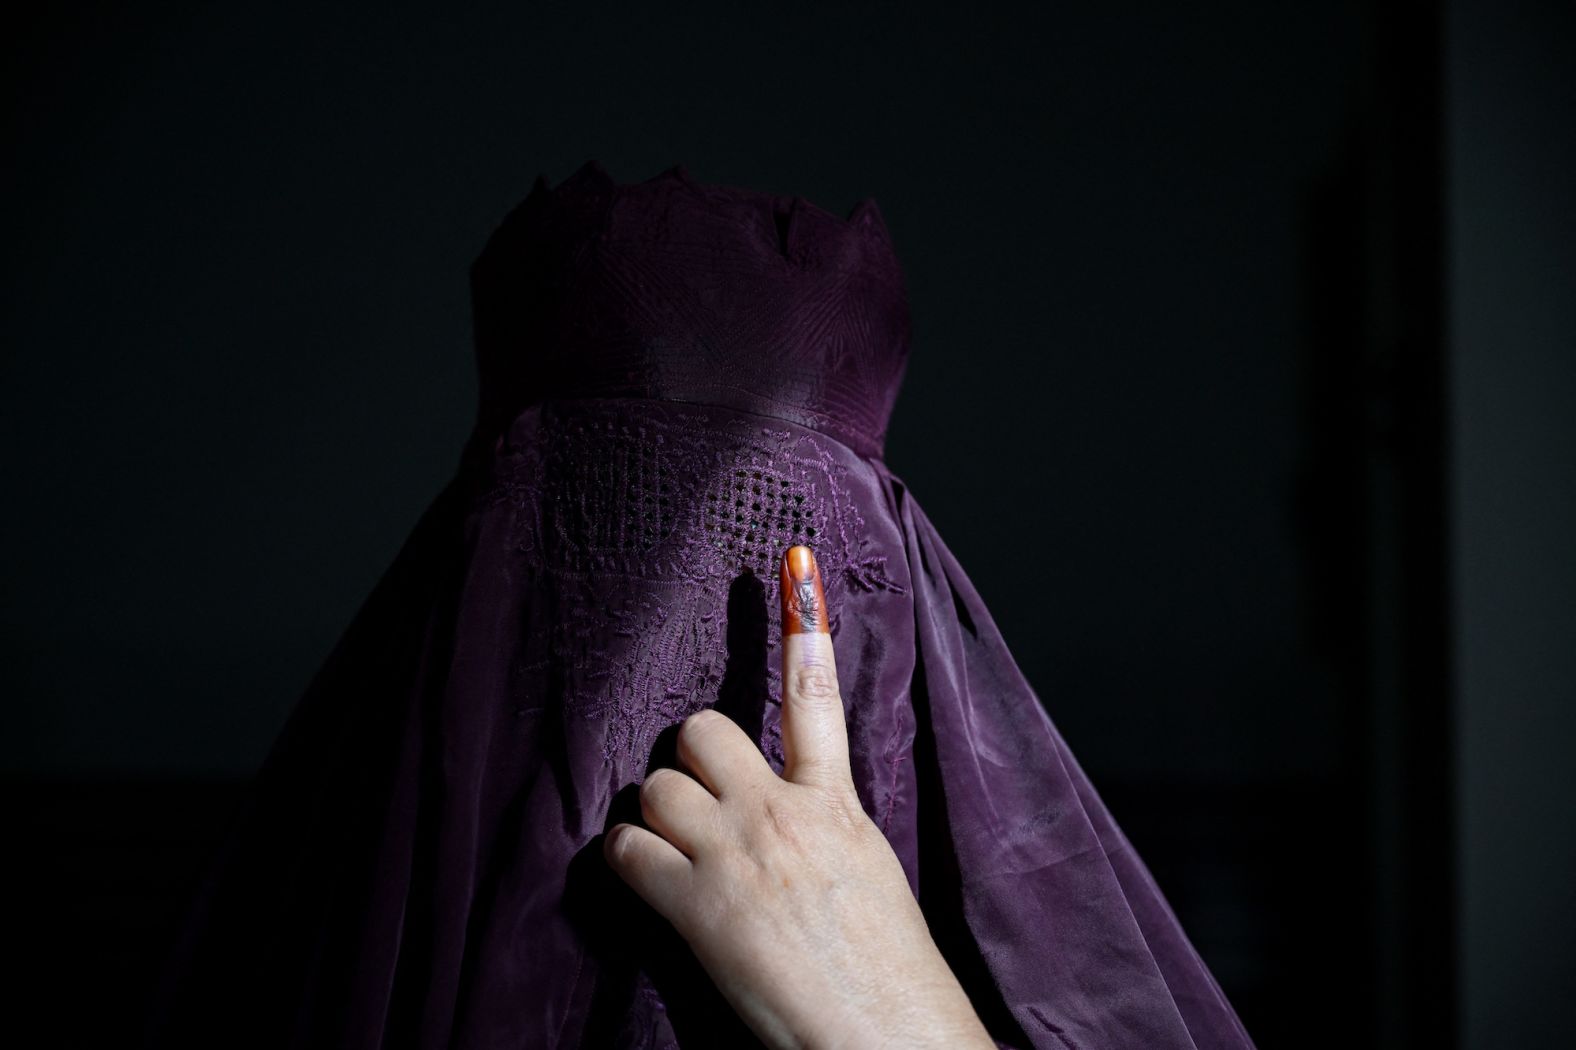 A burqa-clad woman shows her inked finger after she cast a ballot in Kairana, India, on Friday, April 19. A mammoth exercise in democracy is underway in India, where nearly a billion people will go to the polls over the next six weeks to vote in <a href="index.php?page=&url=https%3A%2F%2Fwww.cnn.com%2F2024%2F04%2F17%2Findia%2Findia-election-2024-hnk-intl-dg%2Findex.html" target="_blank">the world's largest-ever general election</a>.